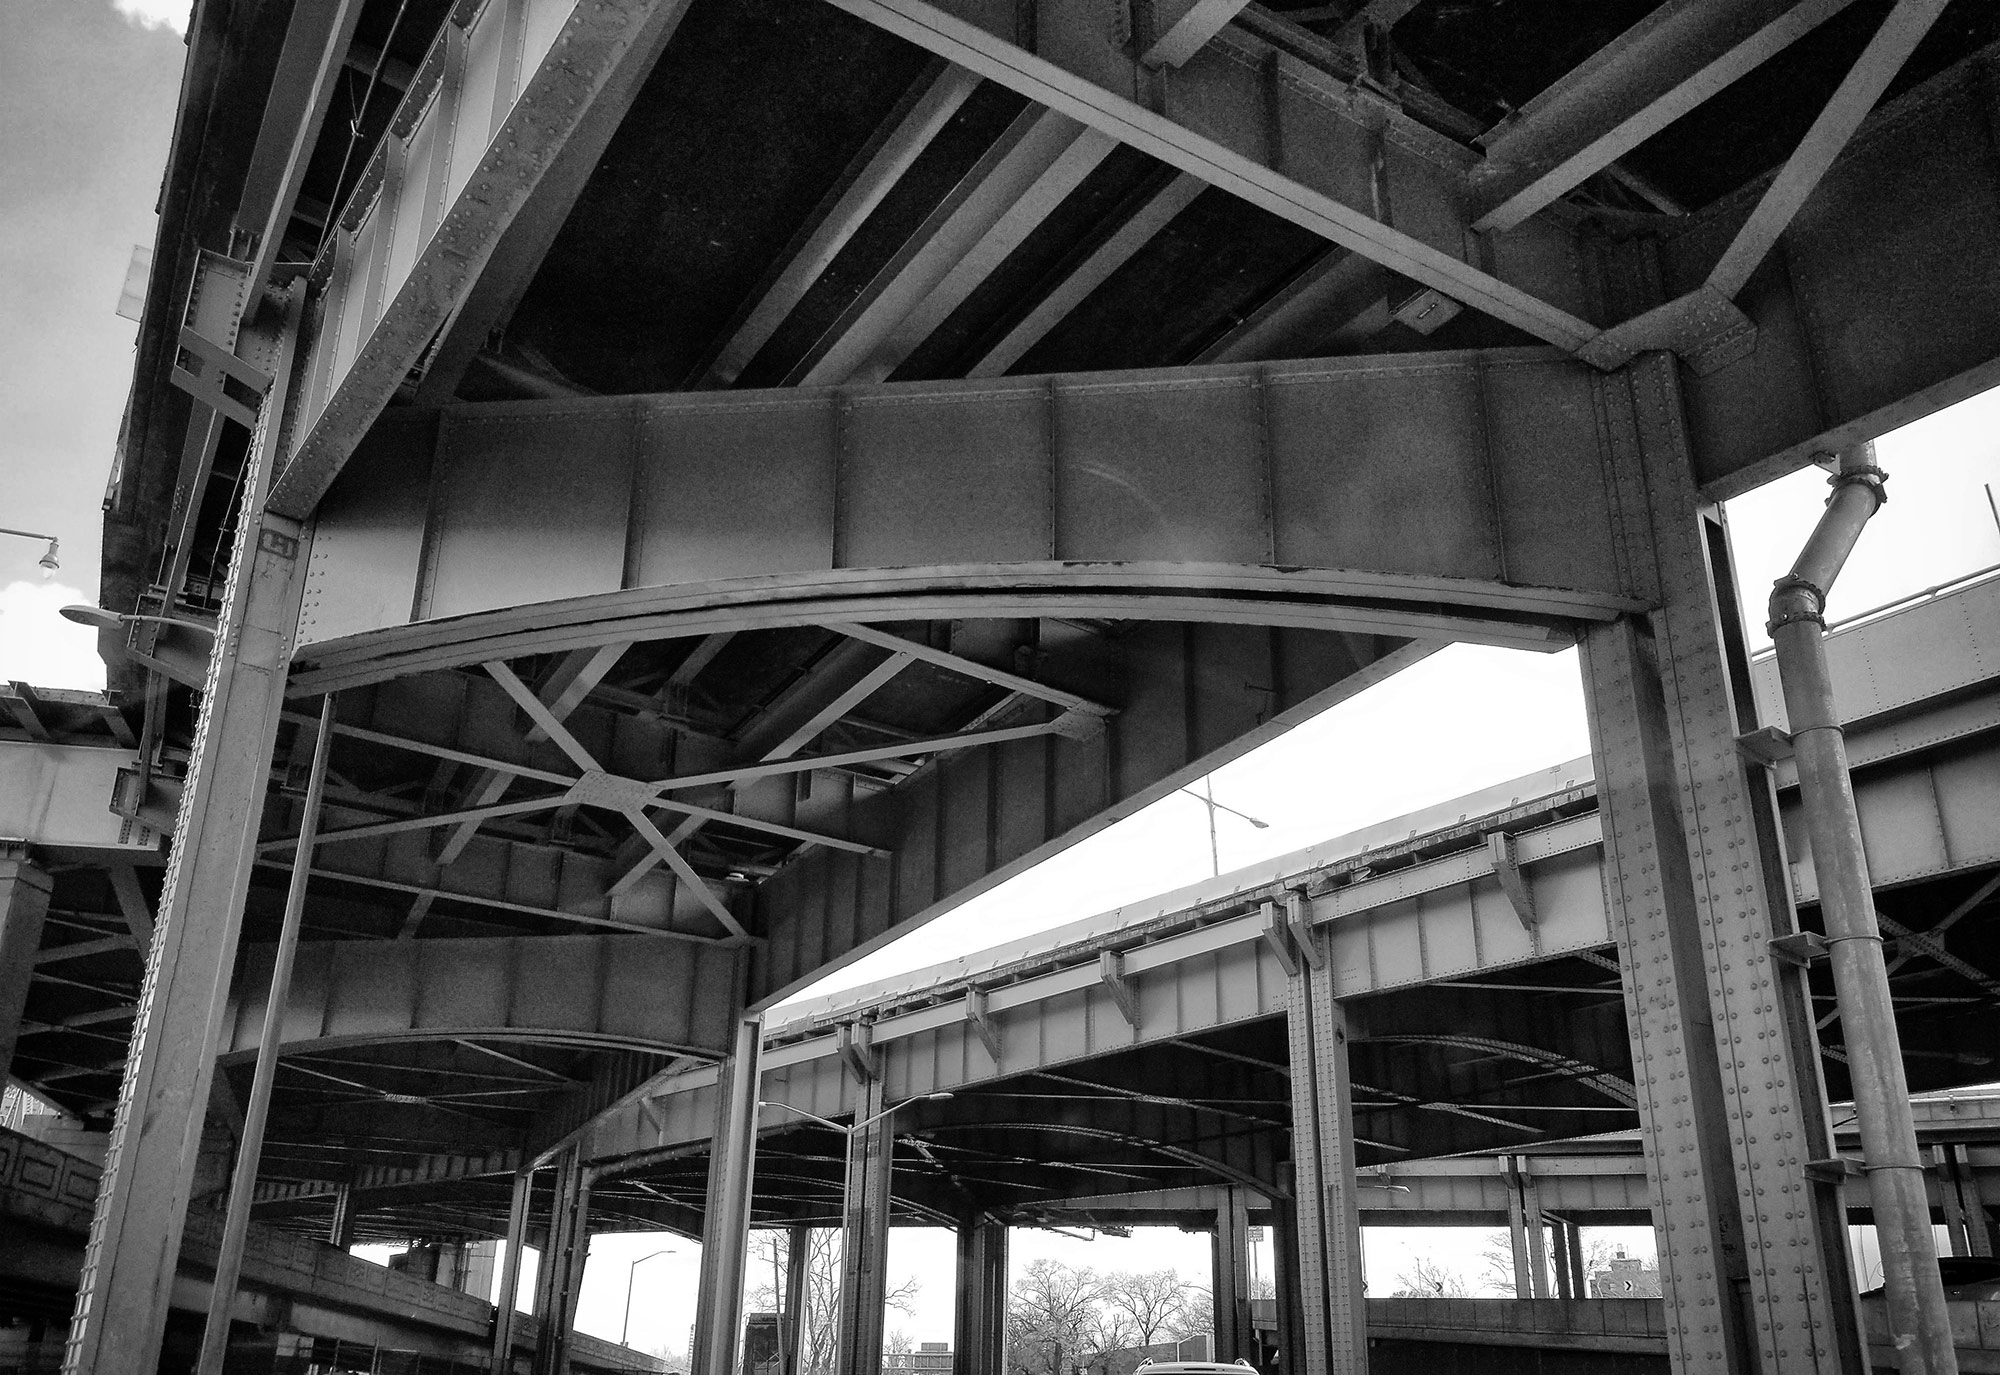   Overpasses ©2018 by bret wills